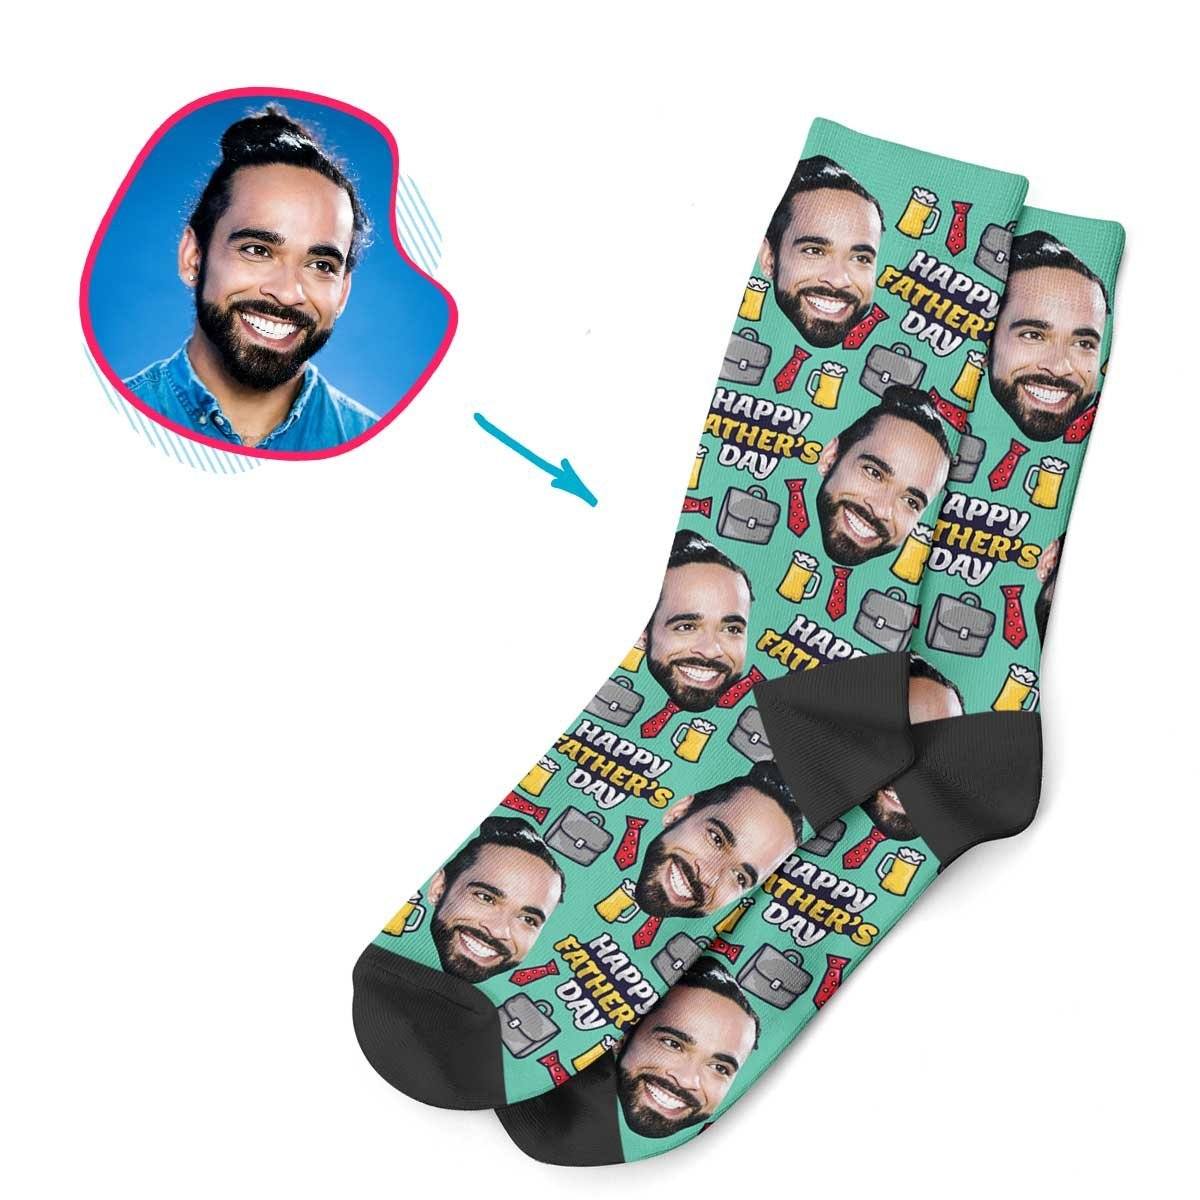 Mint Fathers Day personalized socks with photo of face printed on them